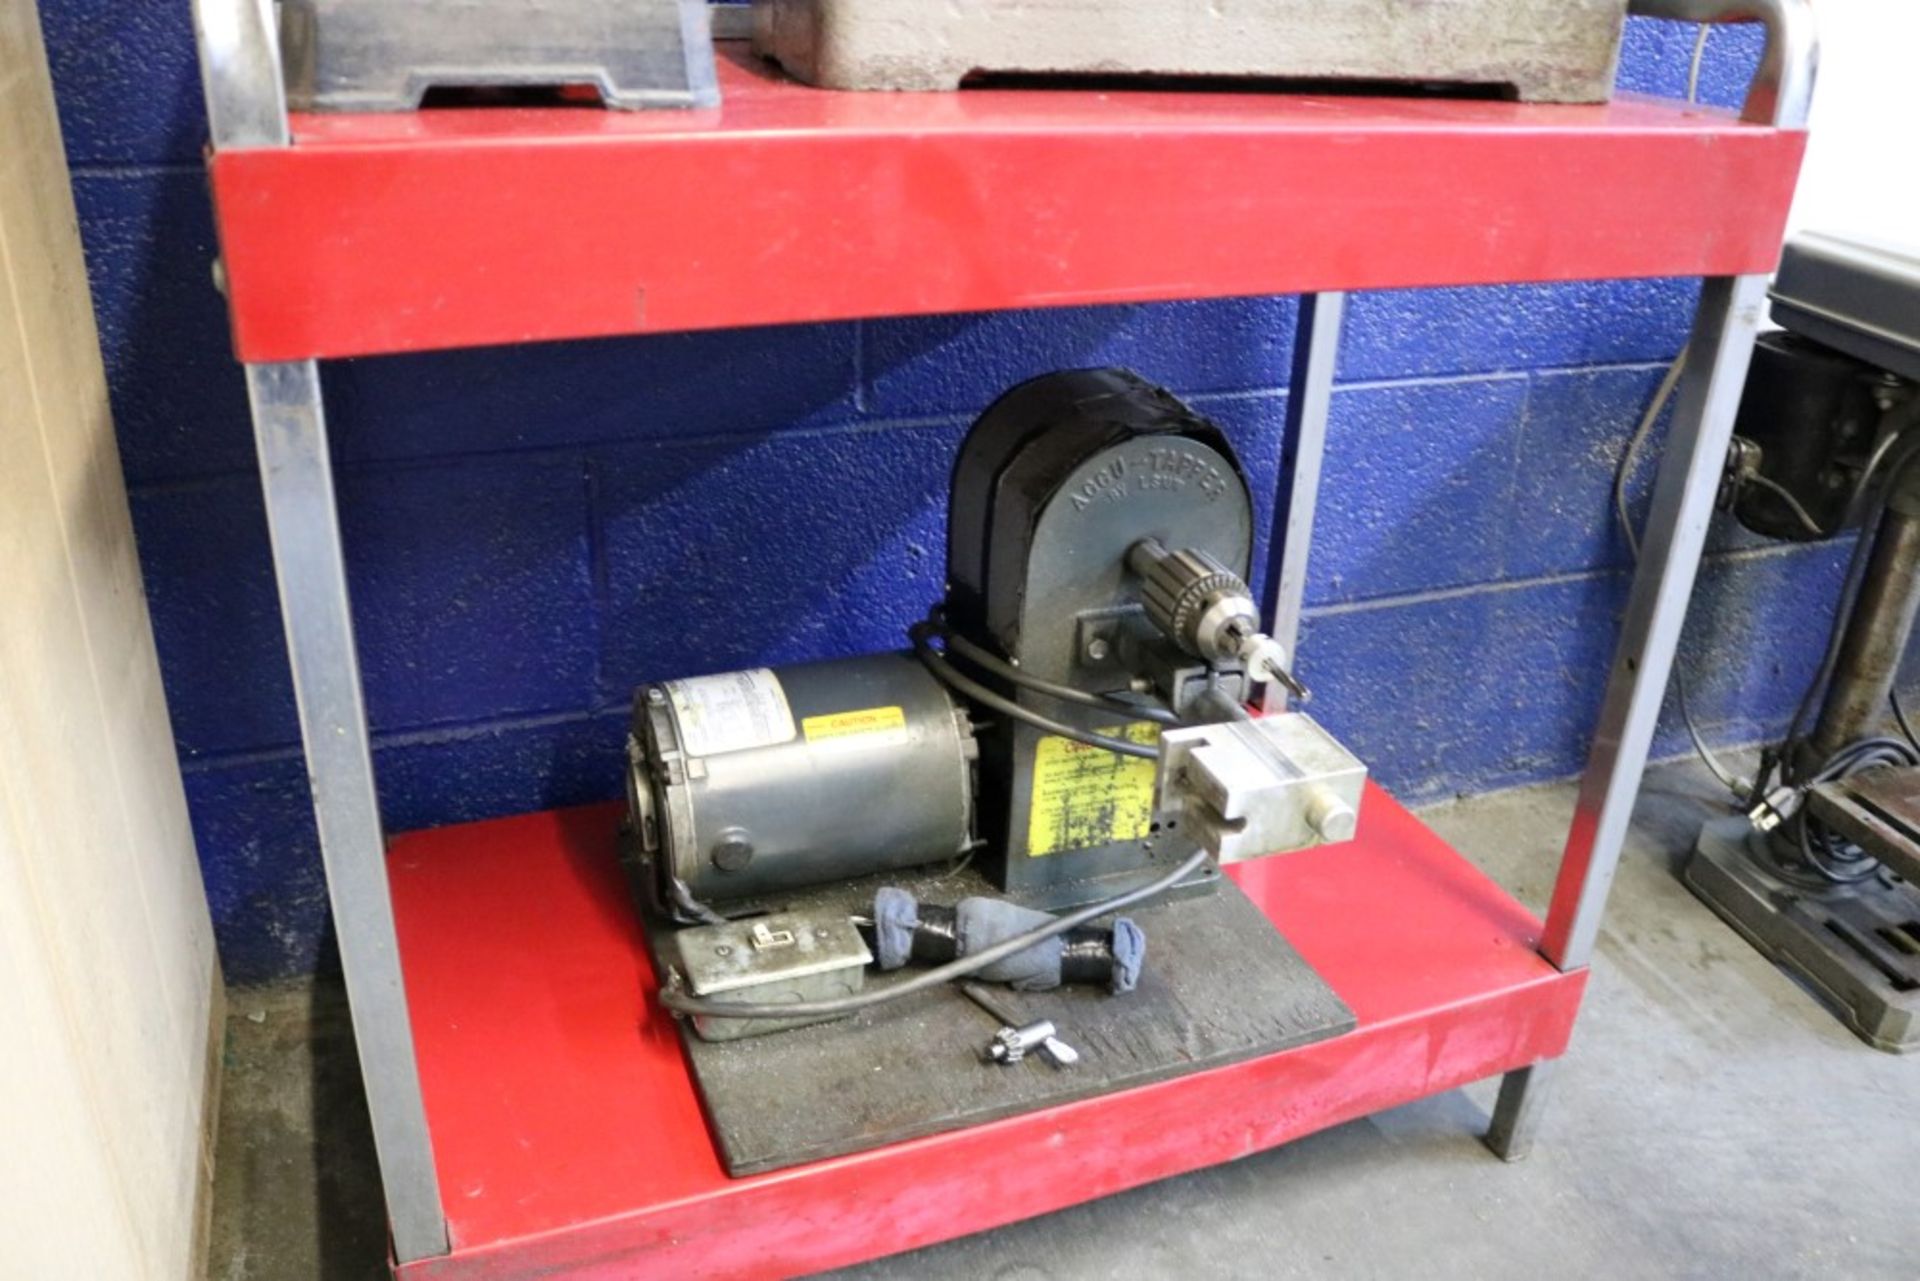 13mm Drill Press Model RDM-1301B, 5 Speed, 1/4 HP and Accu-Tapper By LSMW with Jacob Chuck - Image 7 of 9